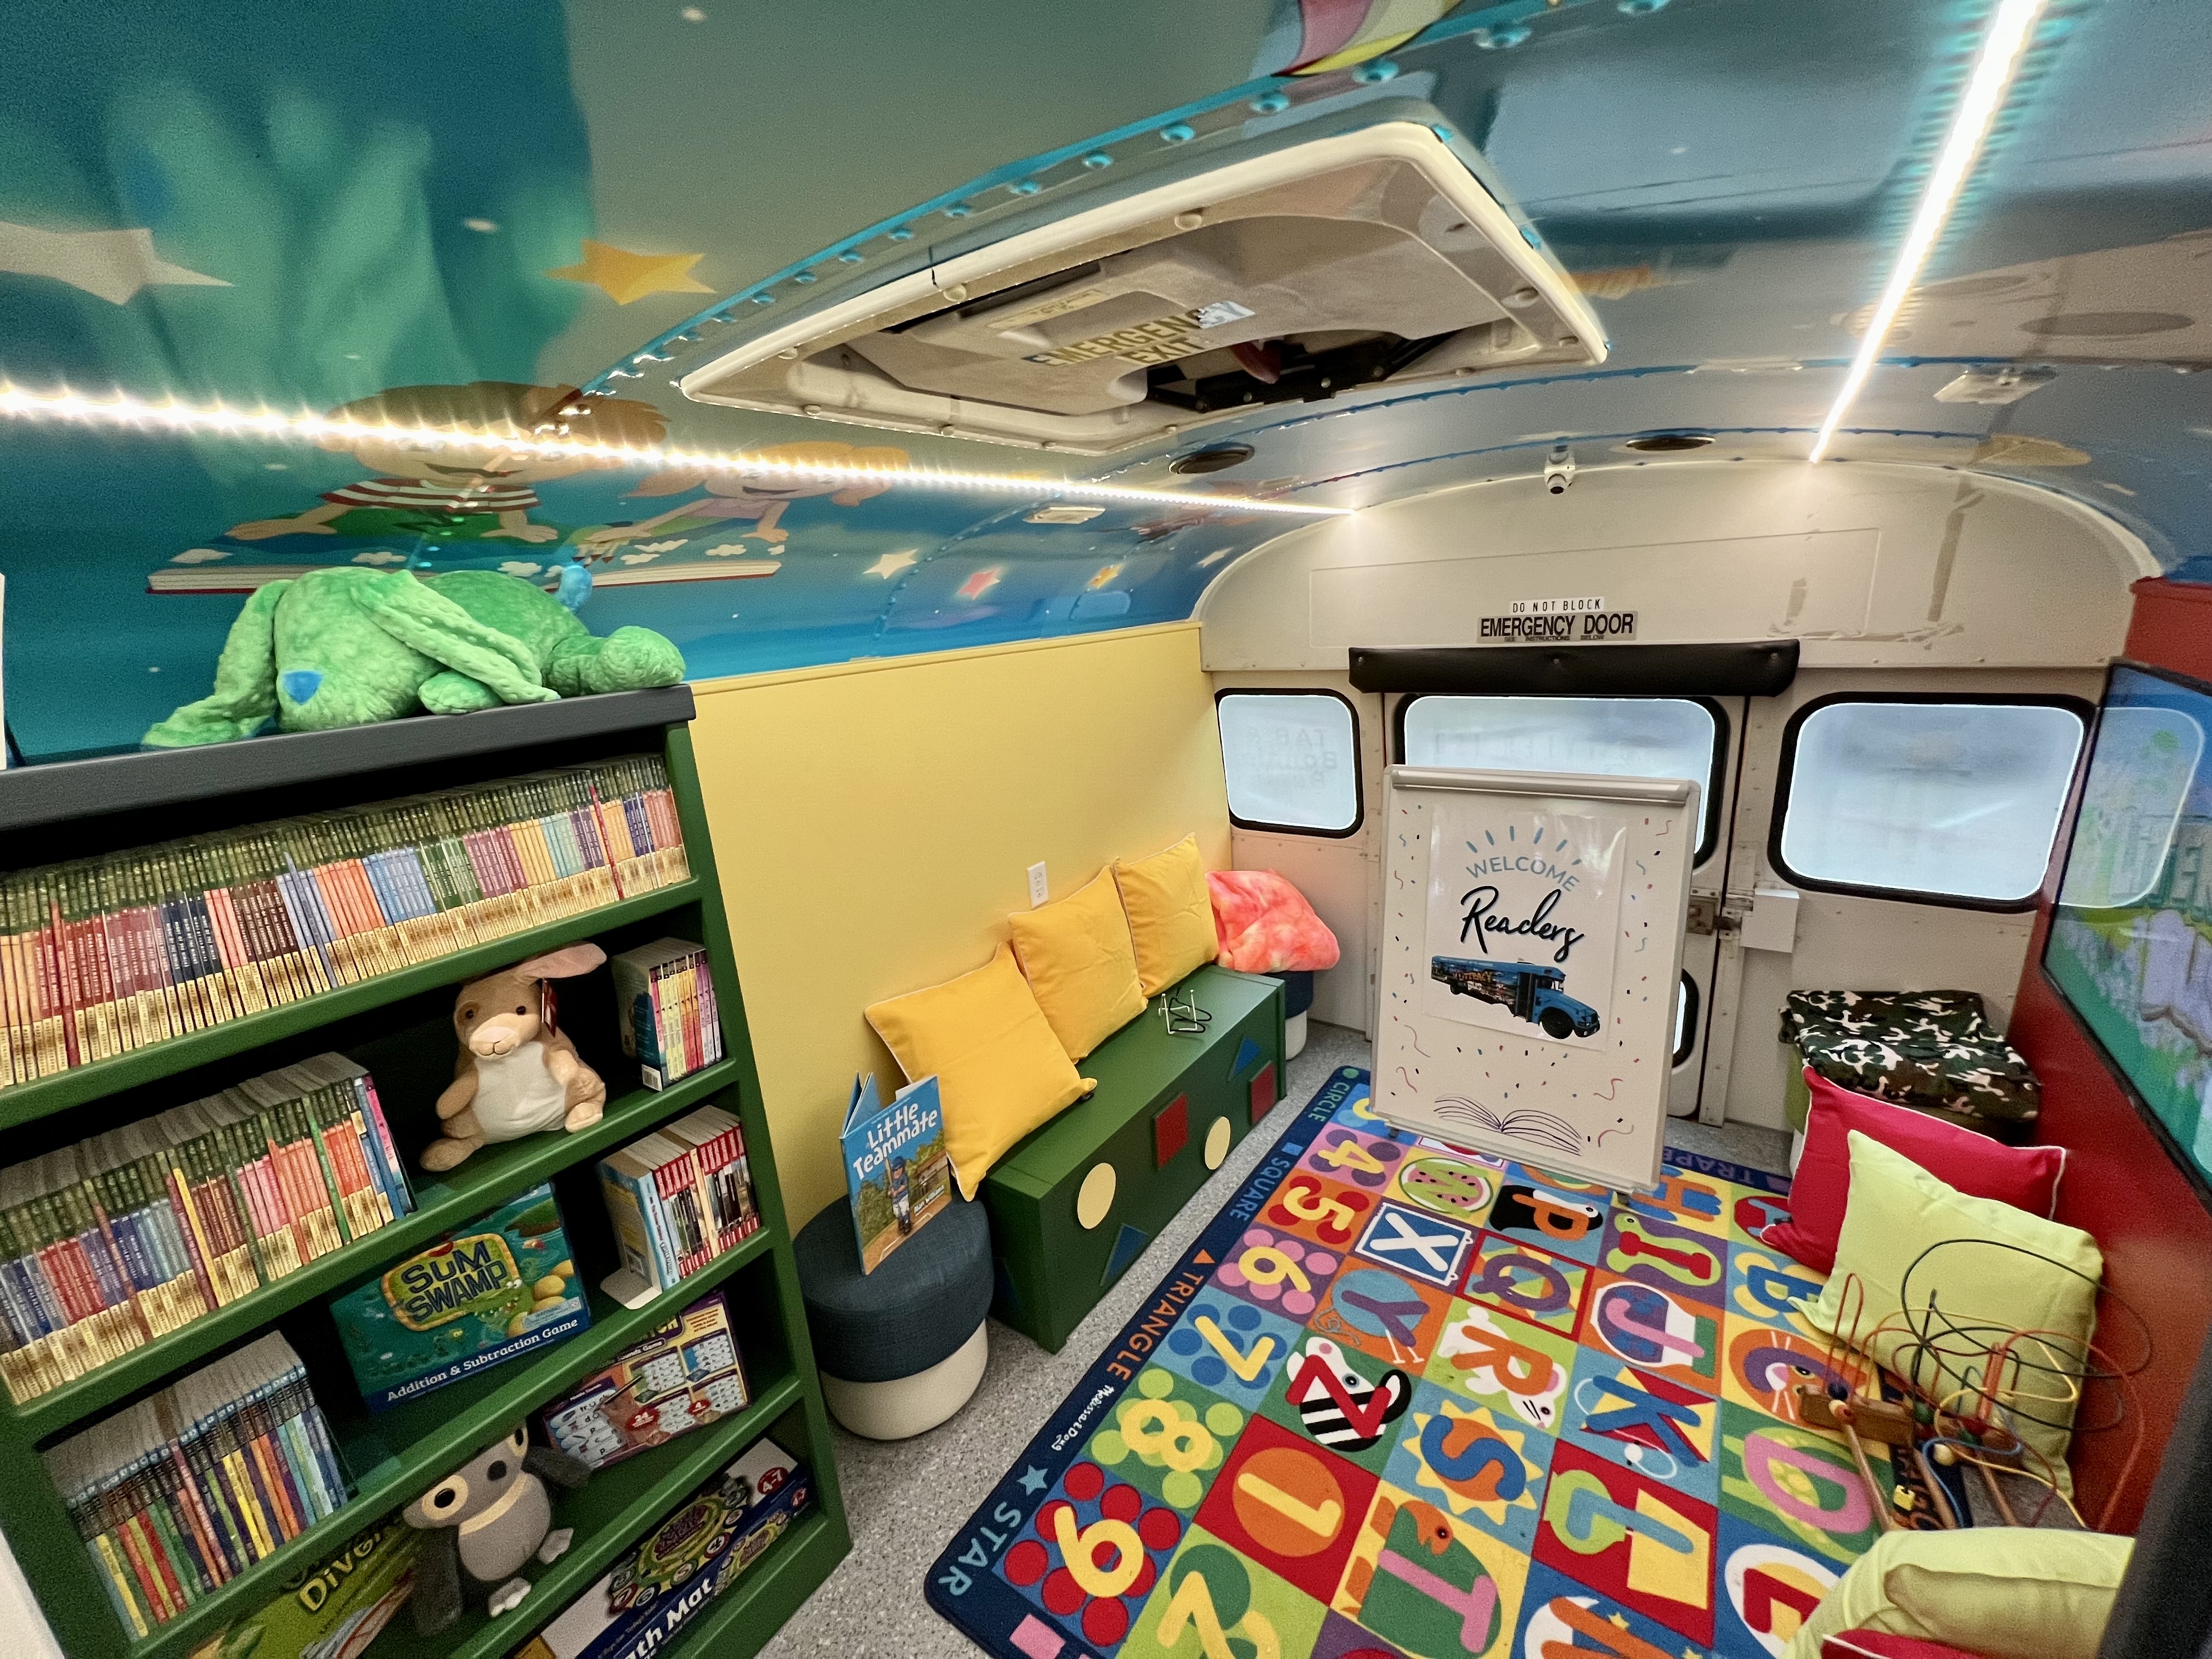 inside of school bus painted in bright colors on roof. All seats have been removed and bookshelves lined with books are along the walls. Chairs, cushions, stuffed animals are also inside